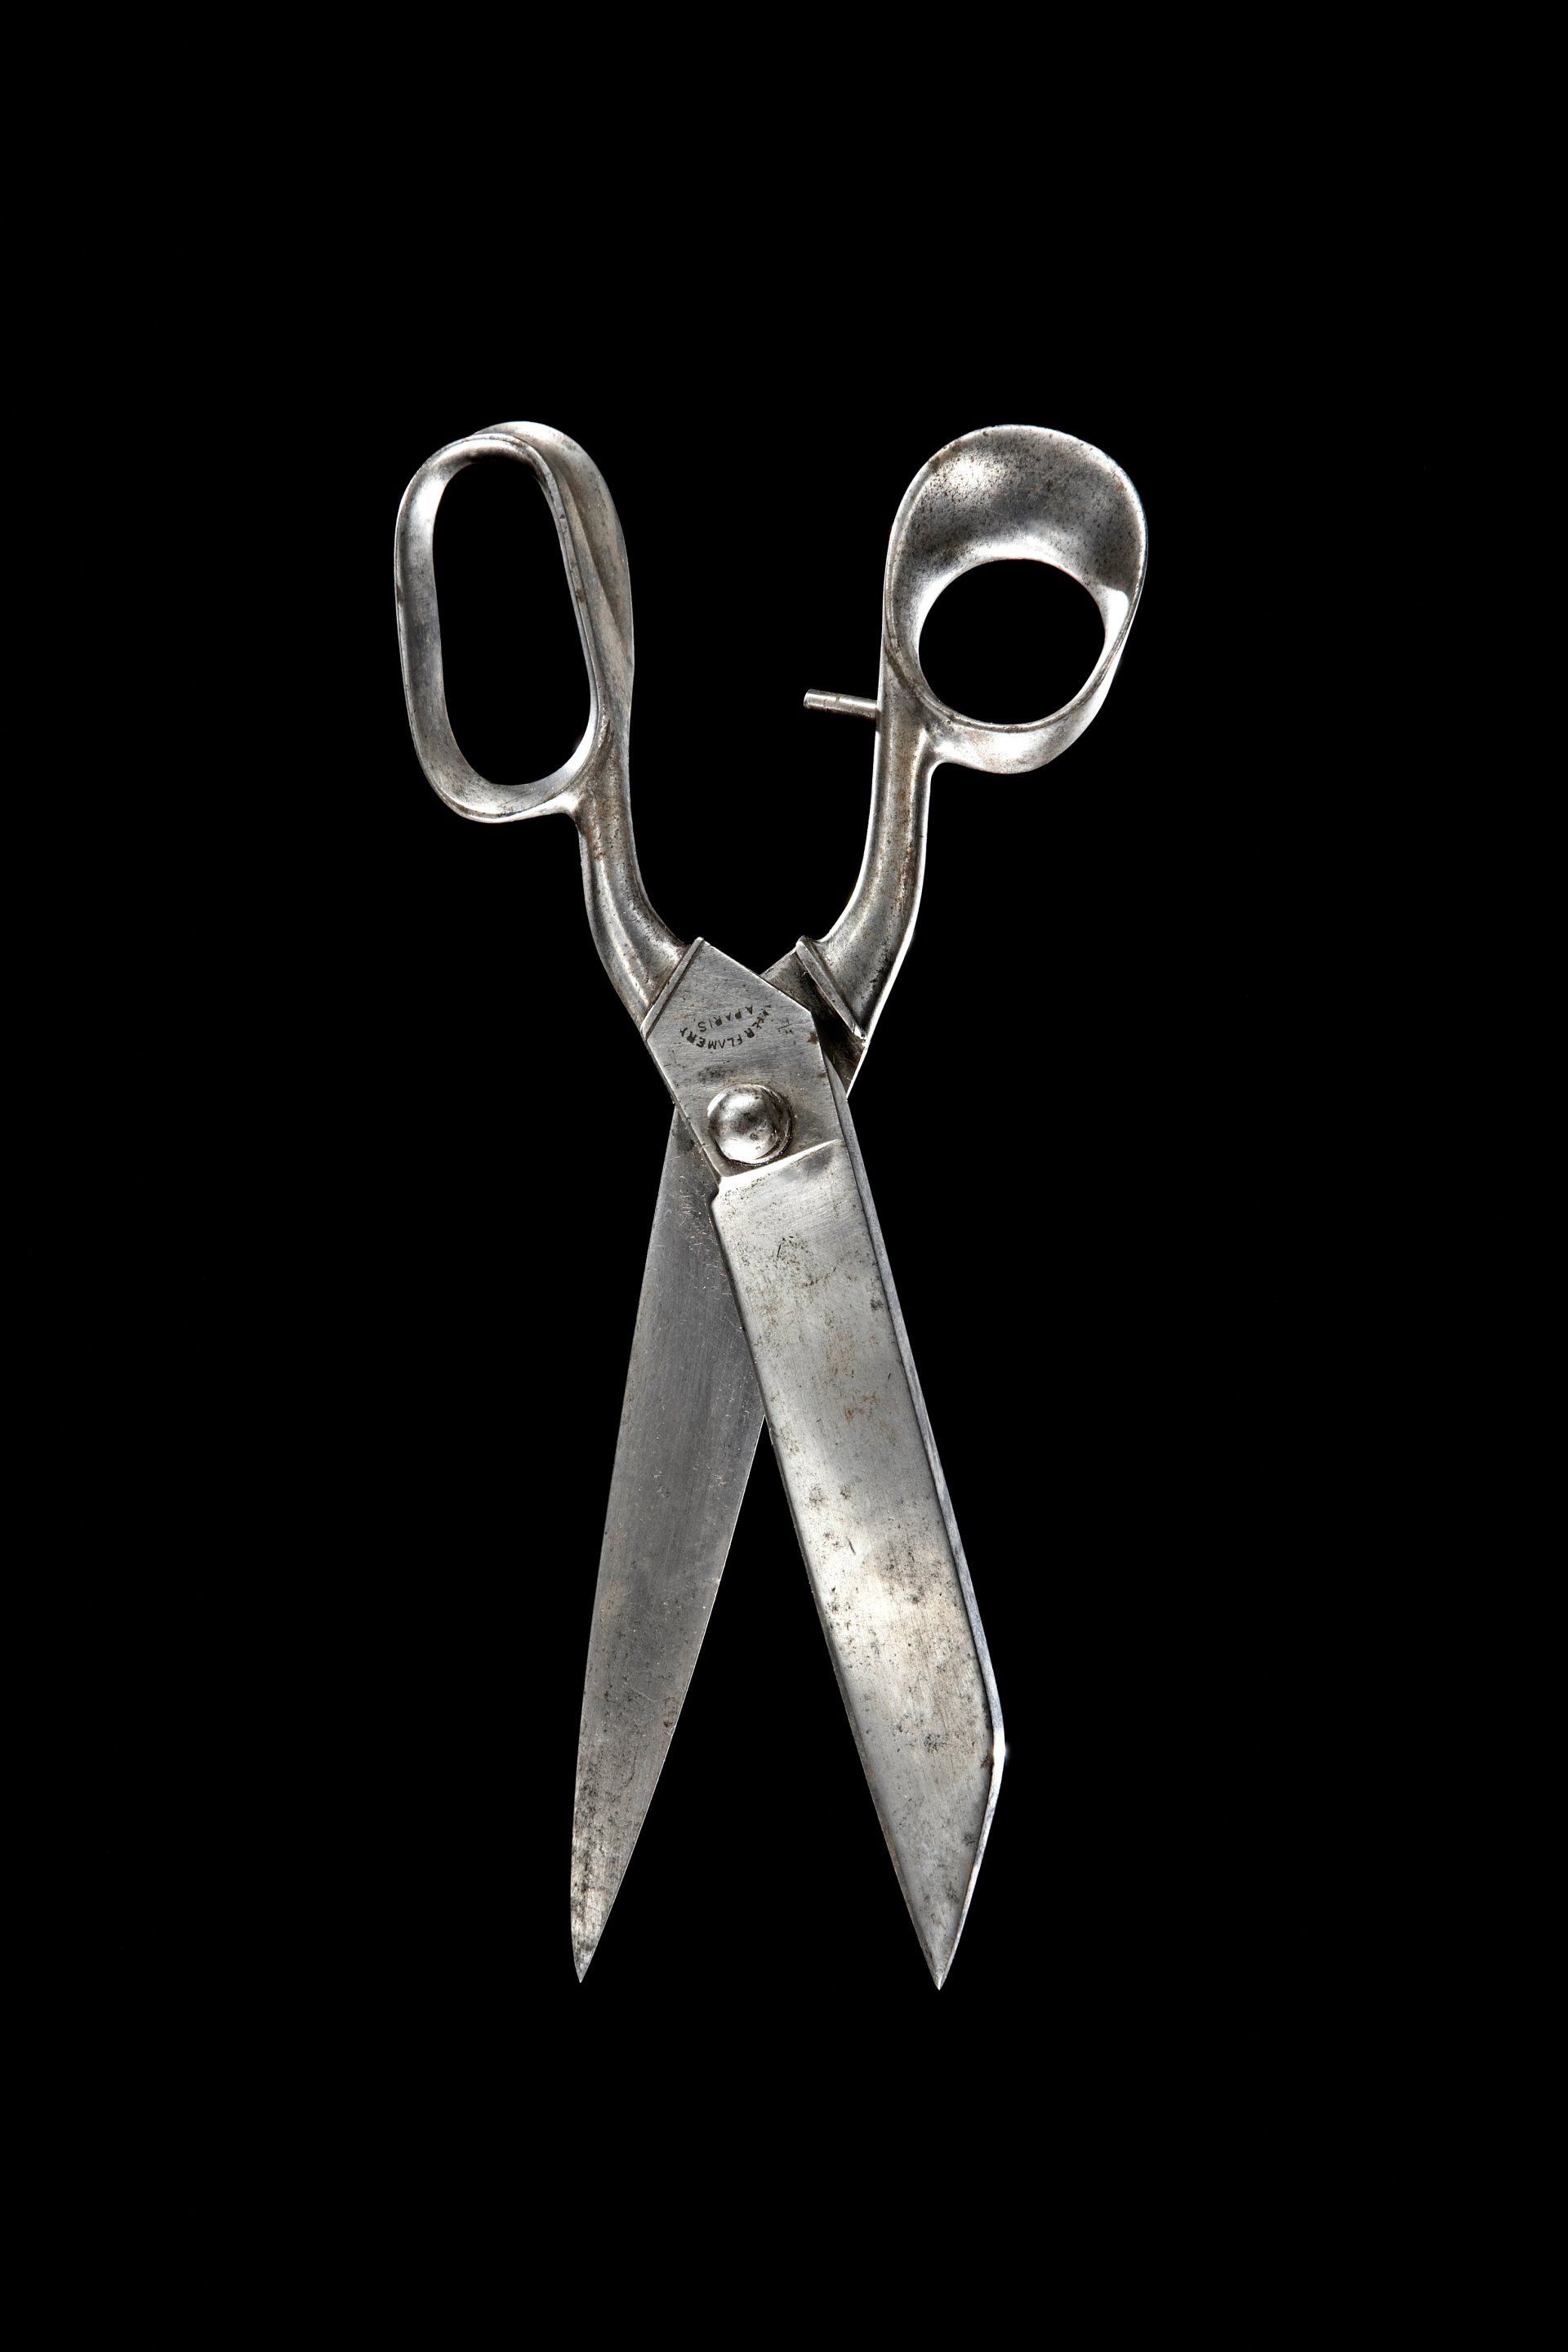 shears silver frontal